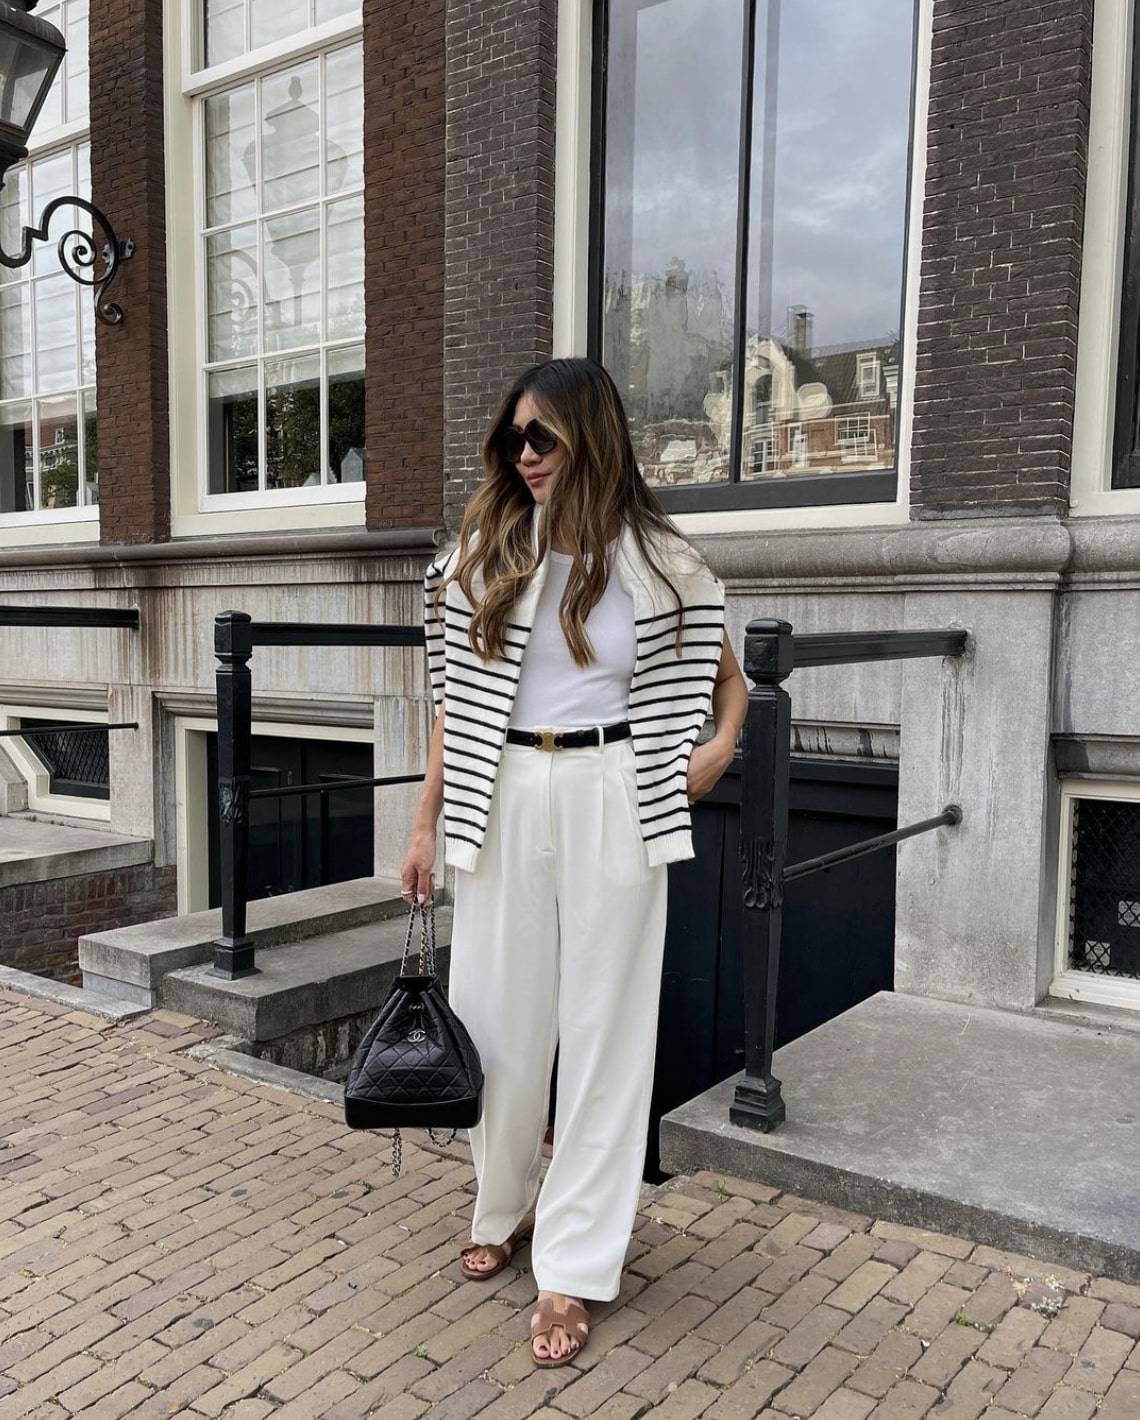 French woman wearing a white shirt with white trousers, and a striped shirt over her shoulders